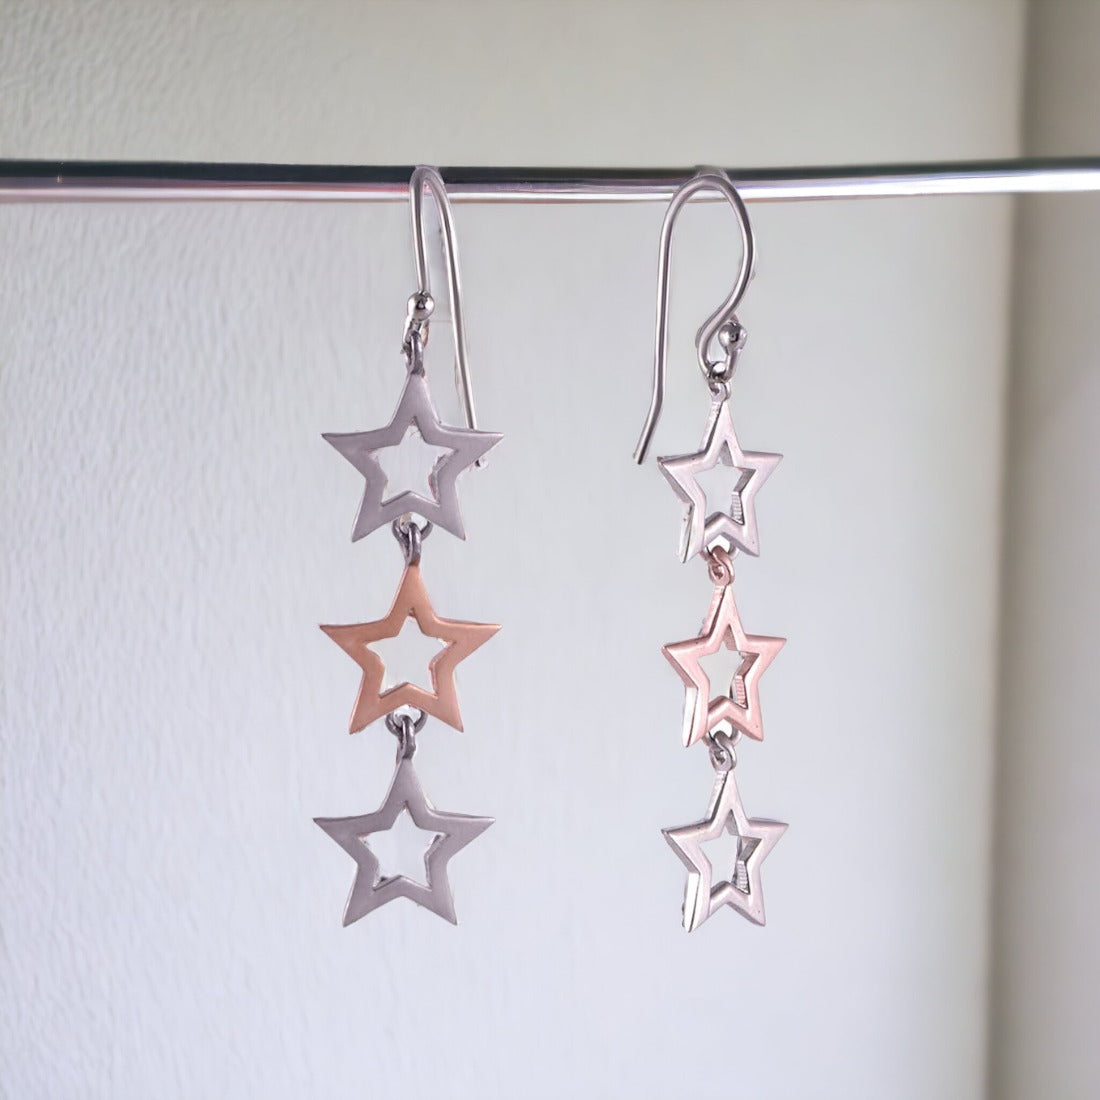 Star Necklace With Earring Set For Women & Girls